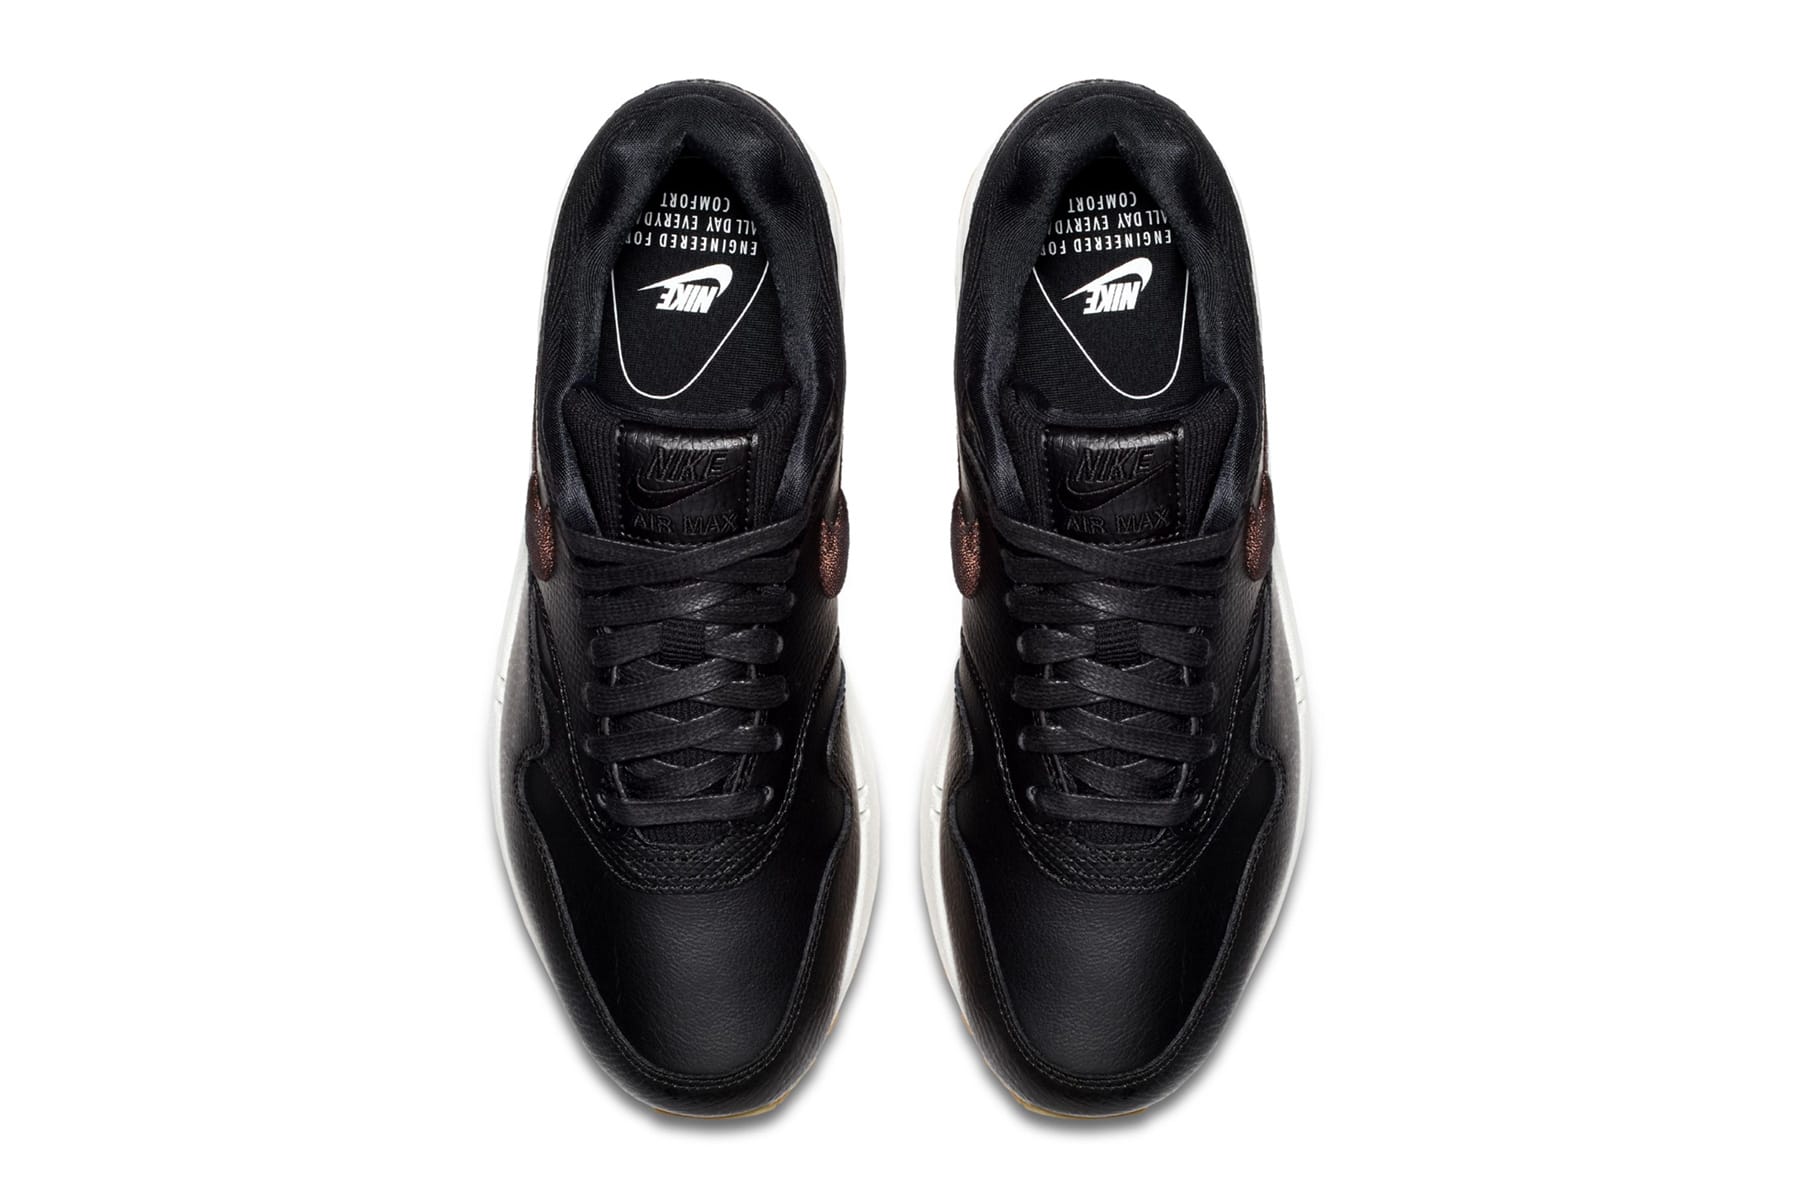 nike air max all black leather